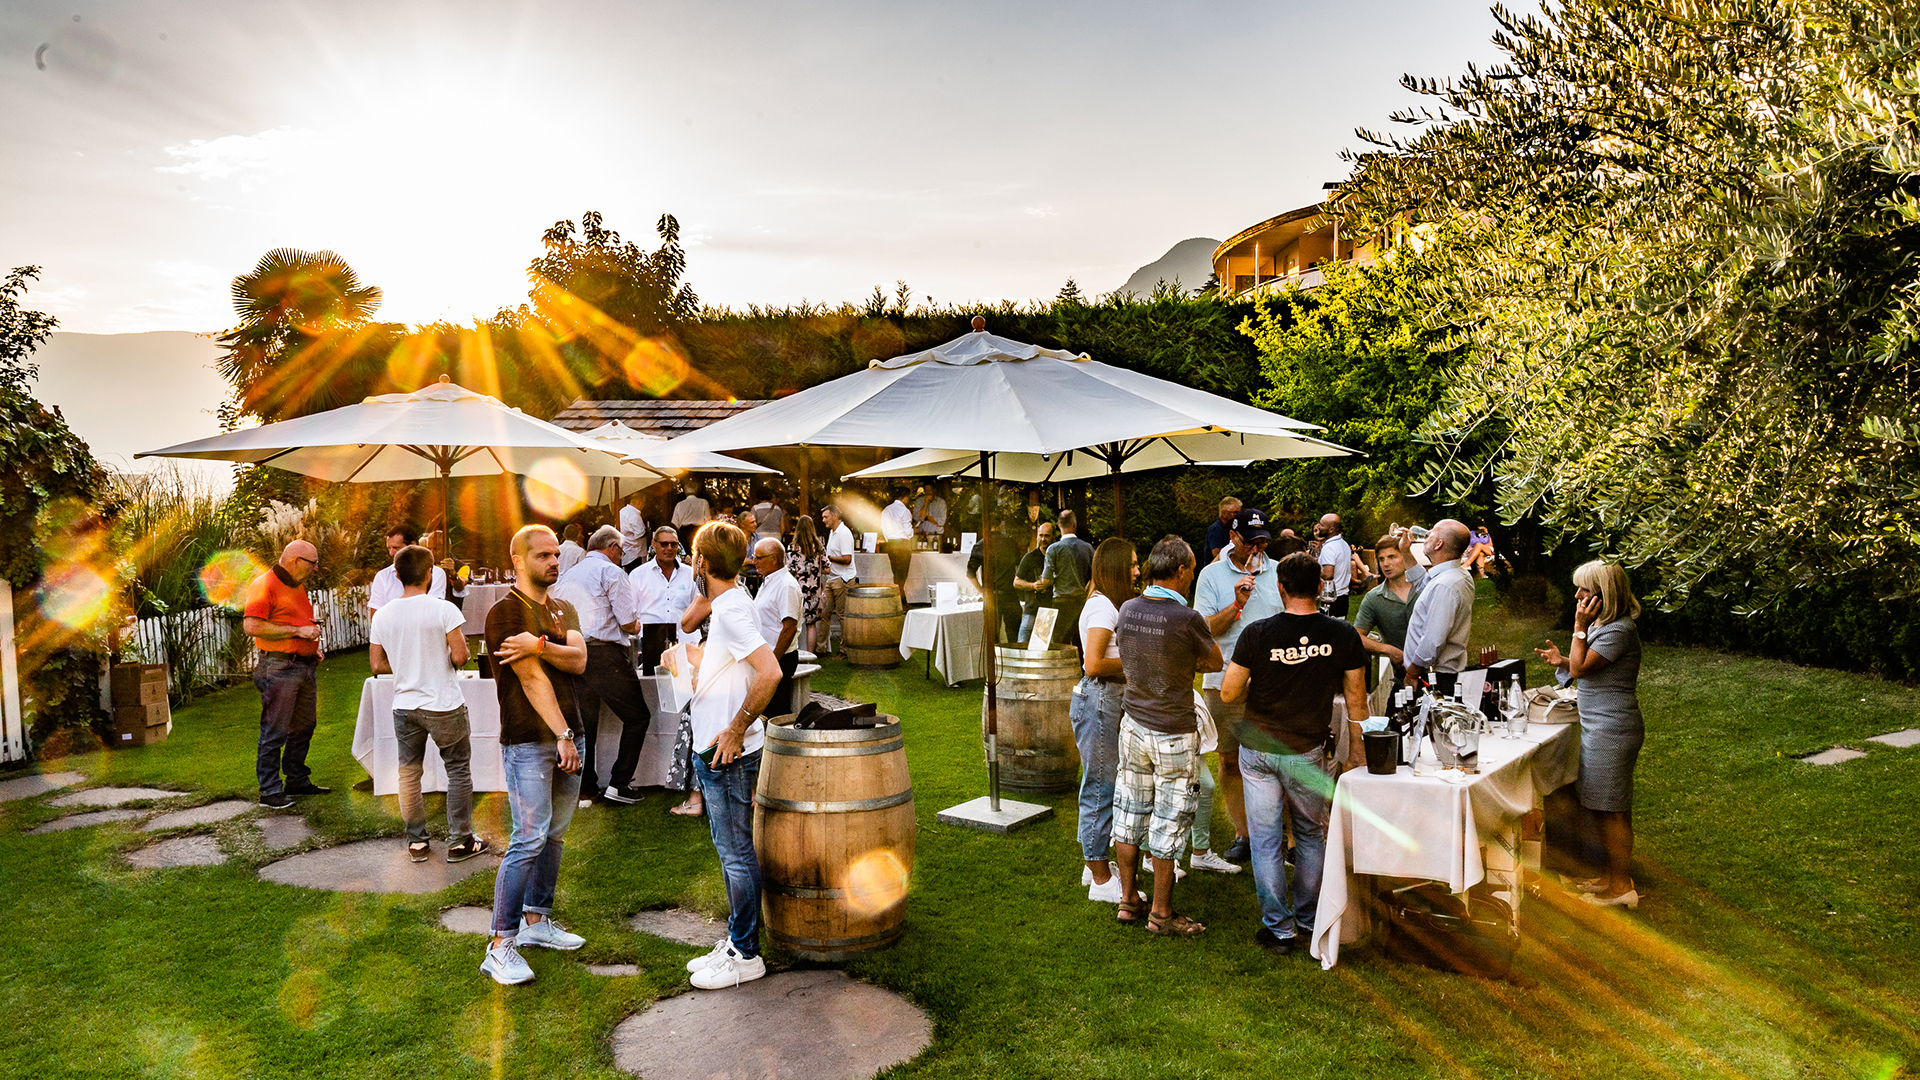 An open-air wine-tasting event where many visitors are intent on tasting wines from various South Tyrolean wineries.